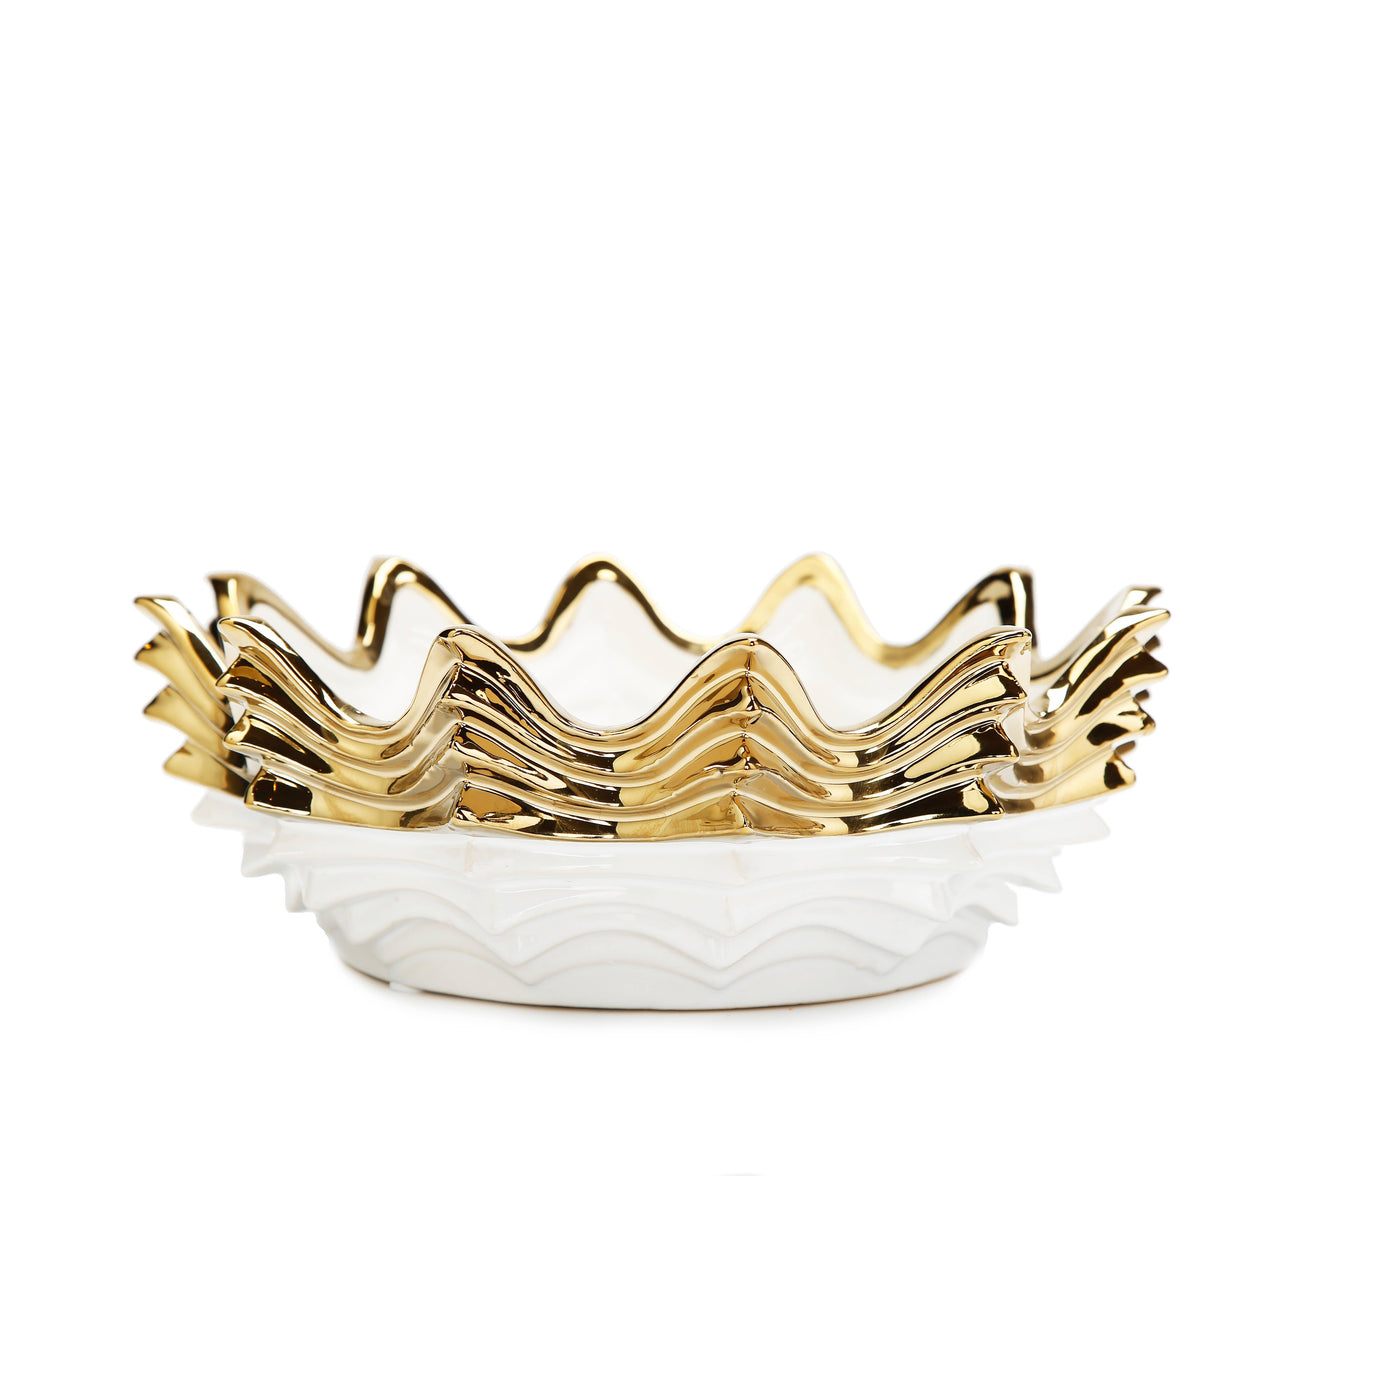 10"D White and Gold Scalloped Bowl